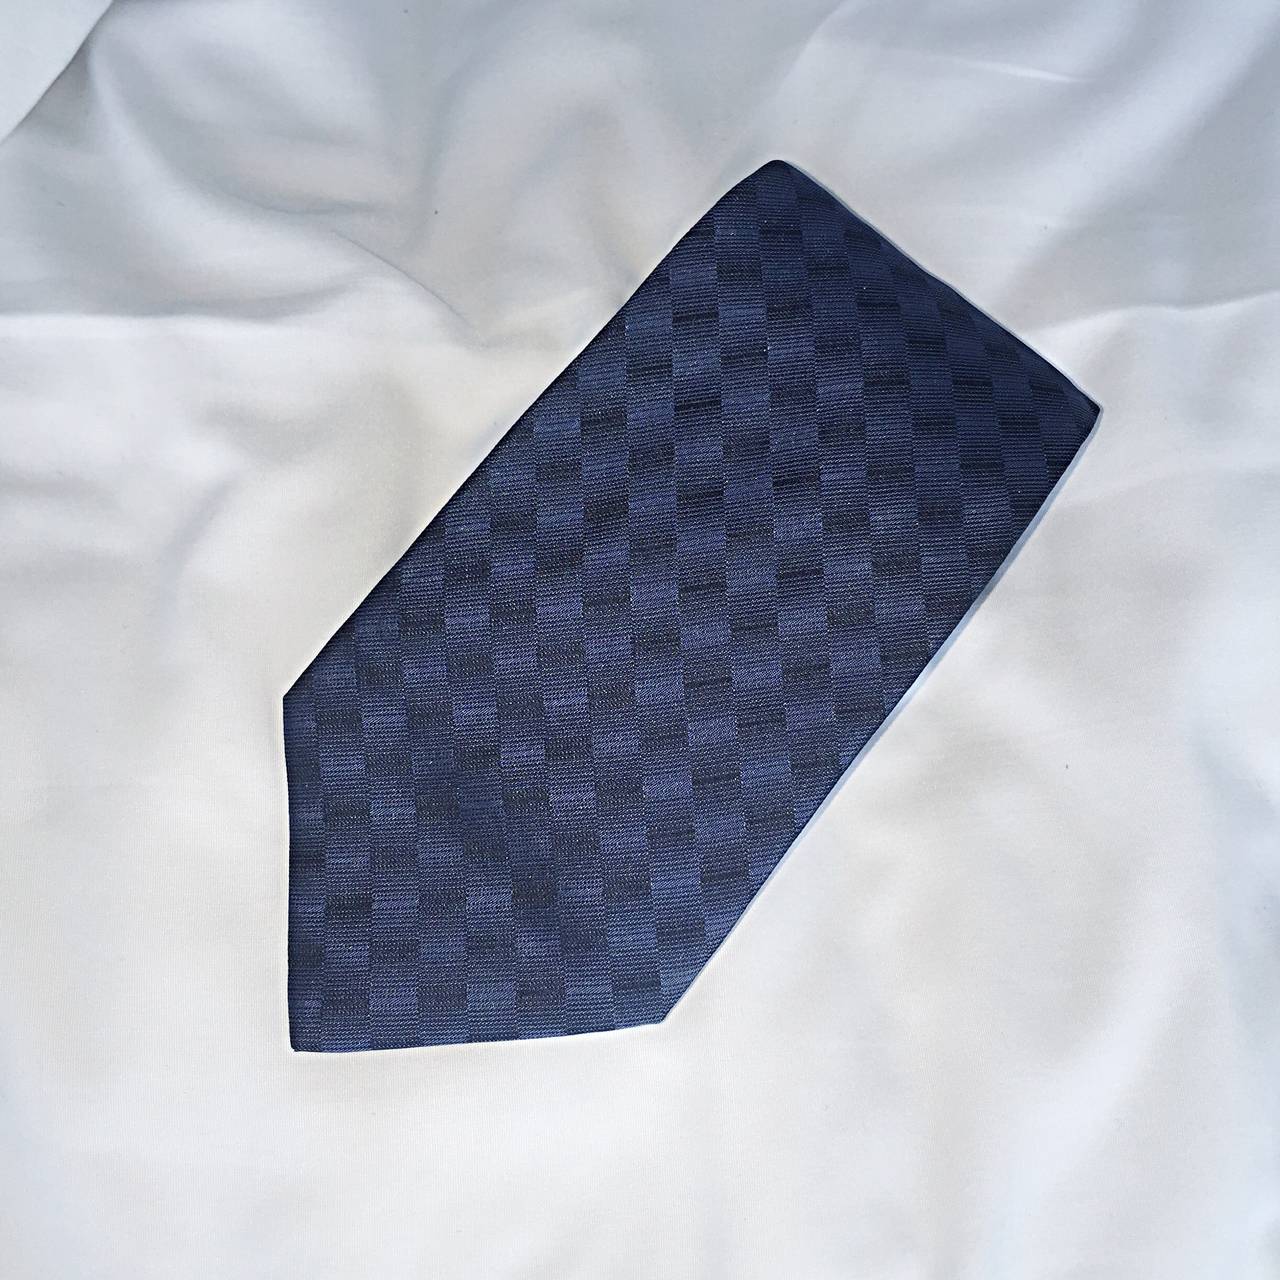 Men's Brand New Givenchy by Ricardo Tisci Navy Blue Tie for Father's Day